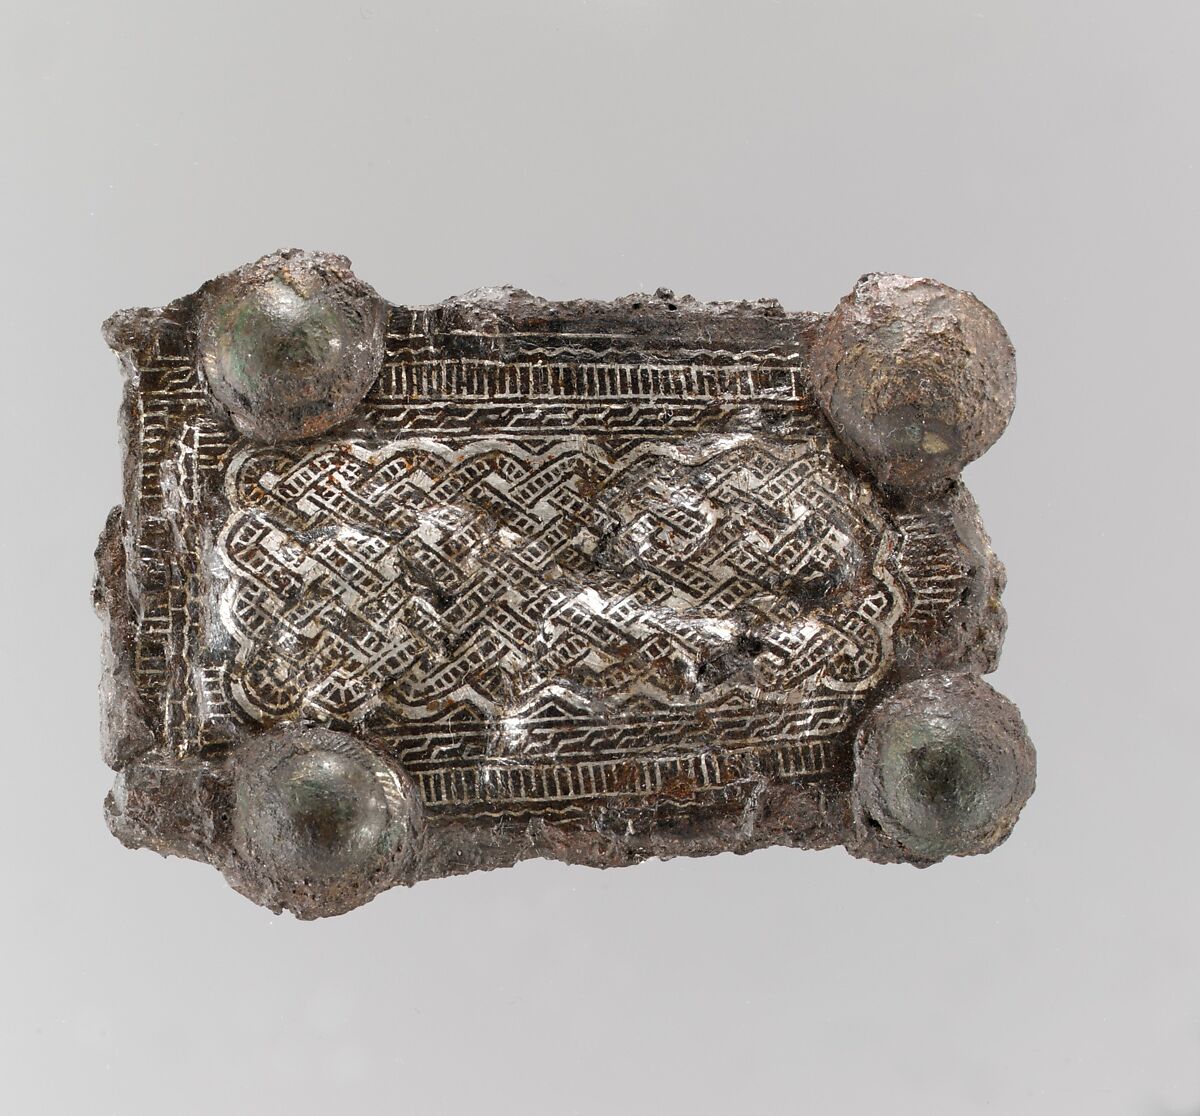 Counter Plate of a Belt Buckle, Iron, silver inlay and copper alloy rivets with incised borders, Frankish or Burgundian 